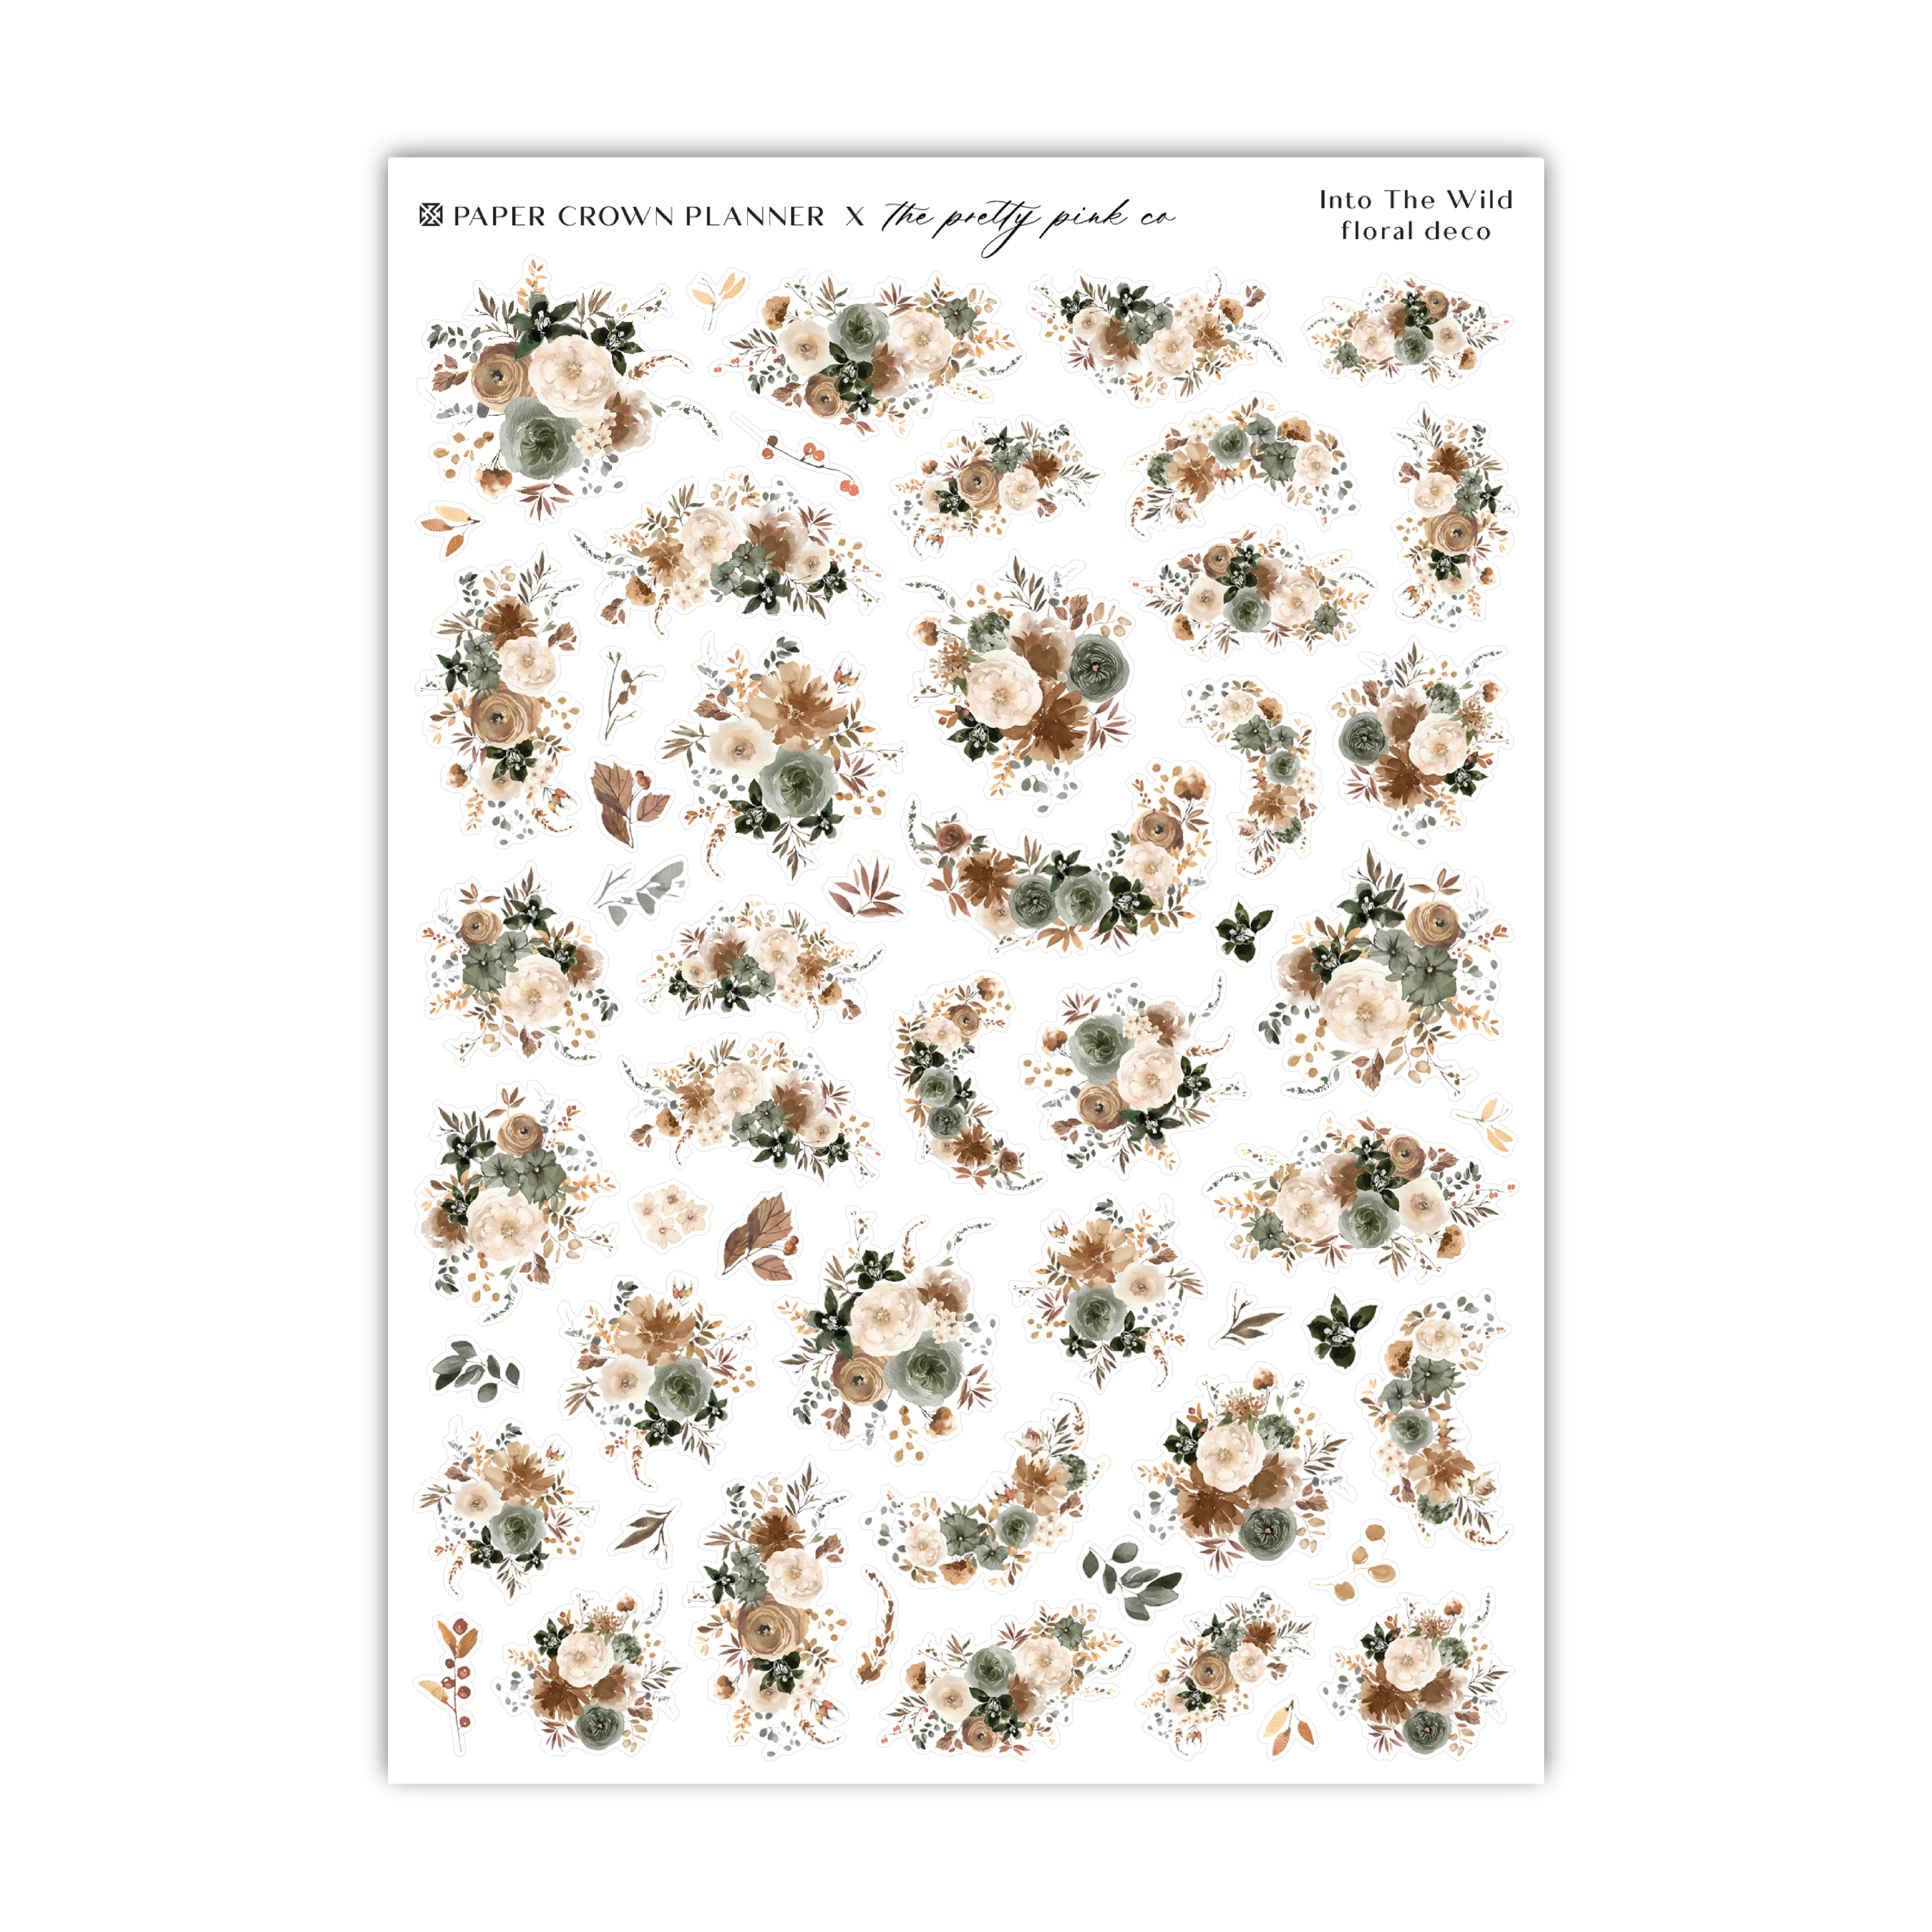 a sheet of paper with flowers on it